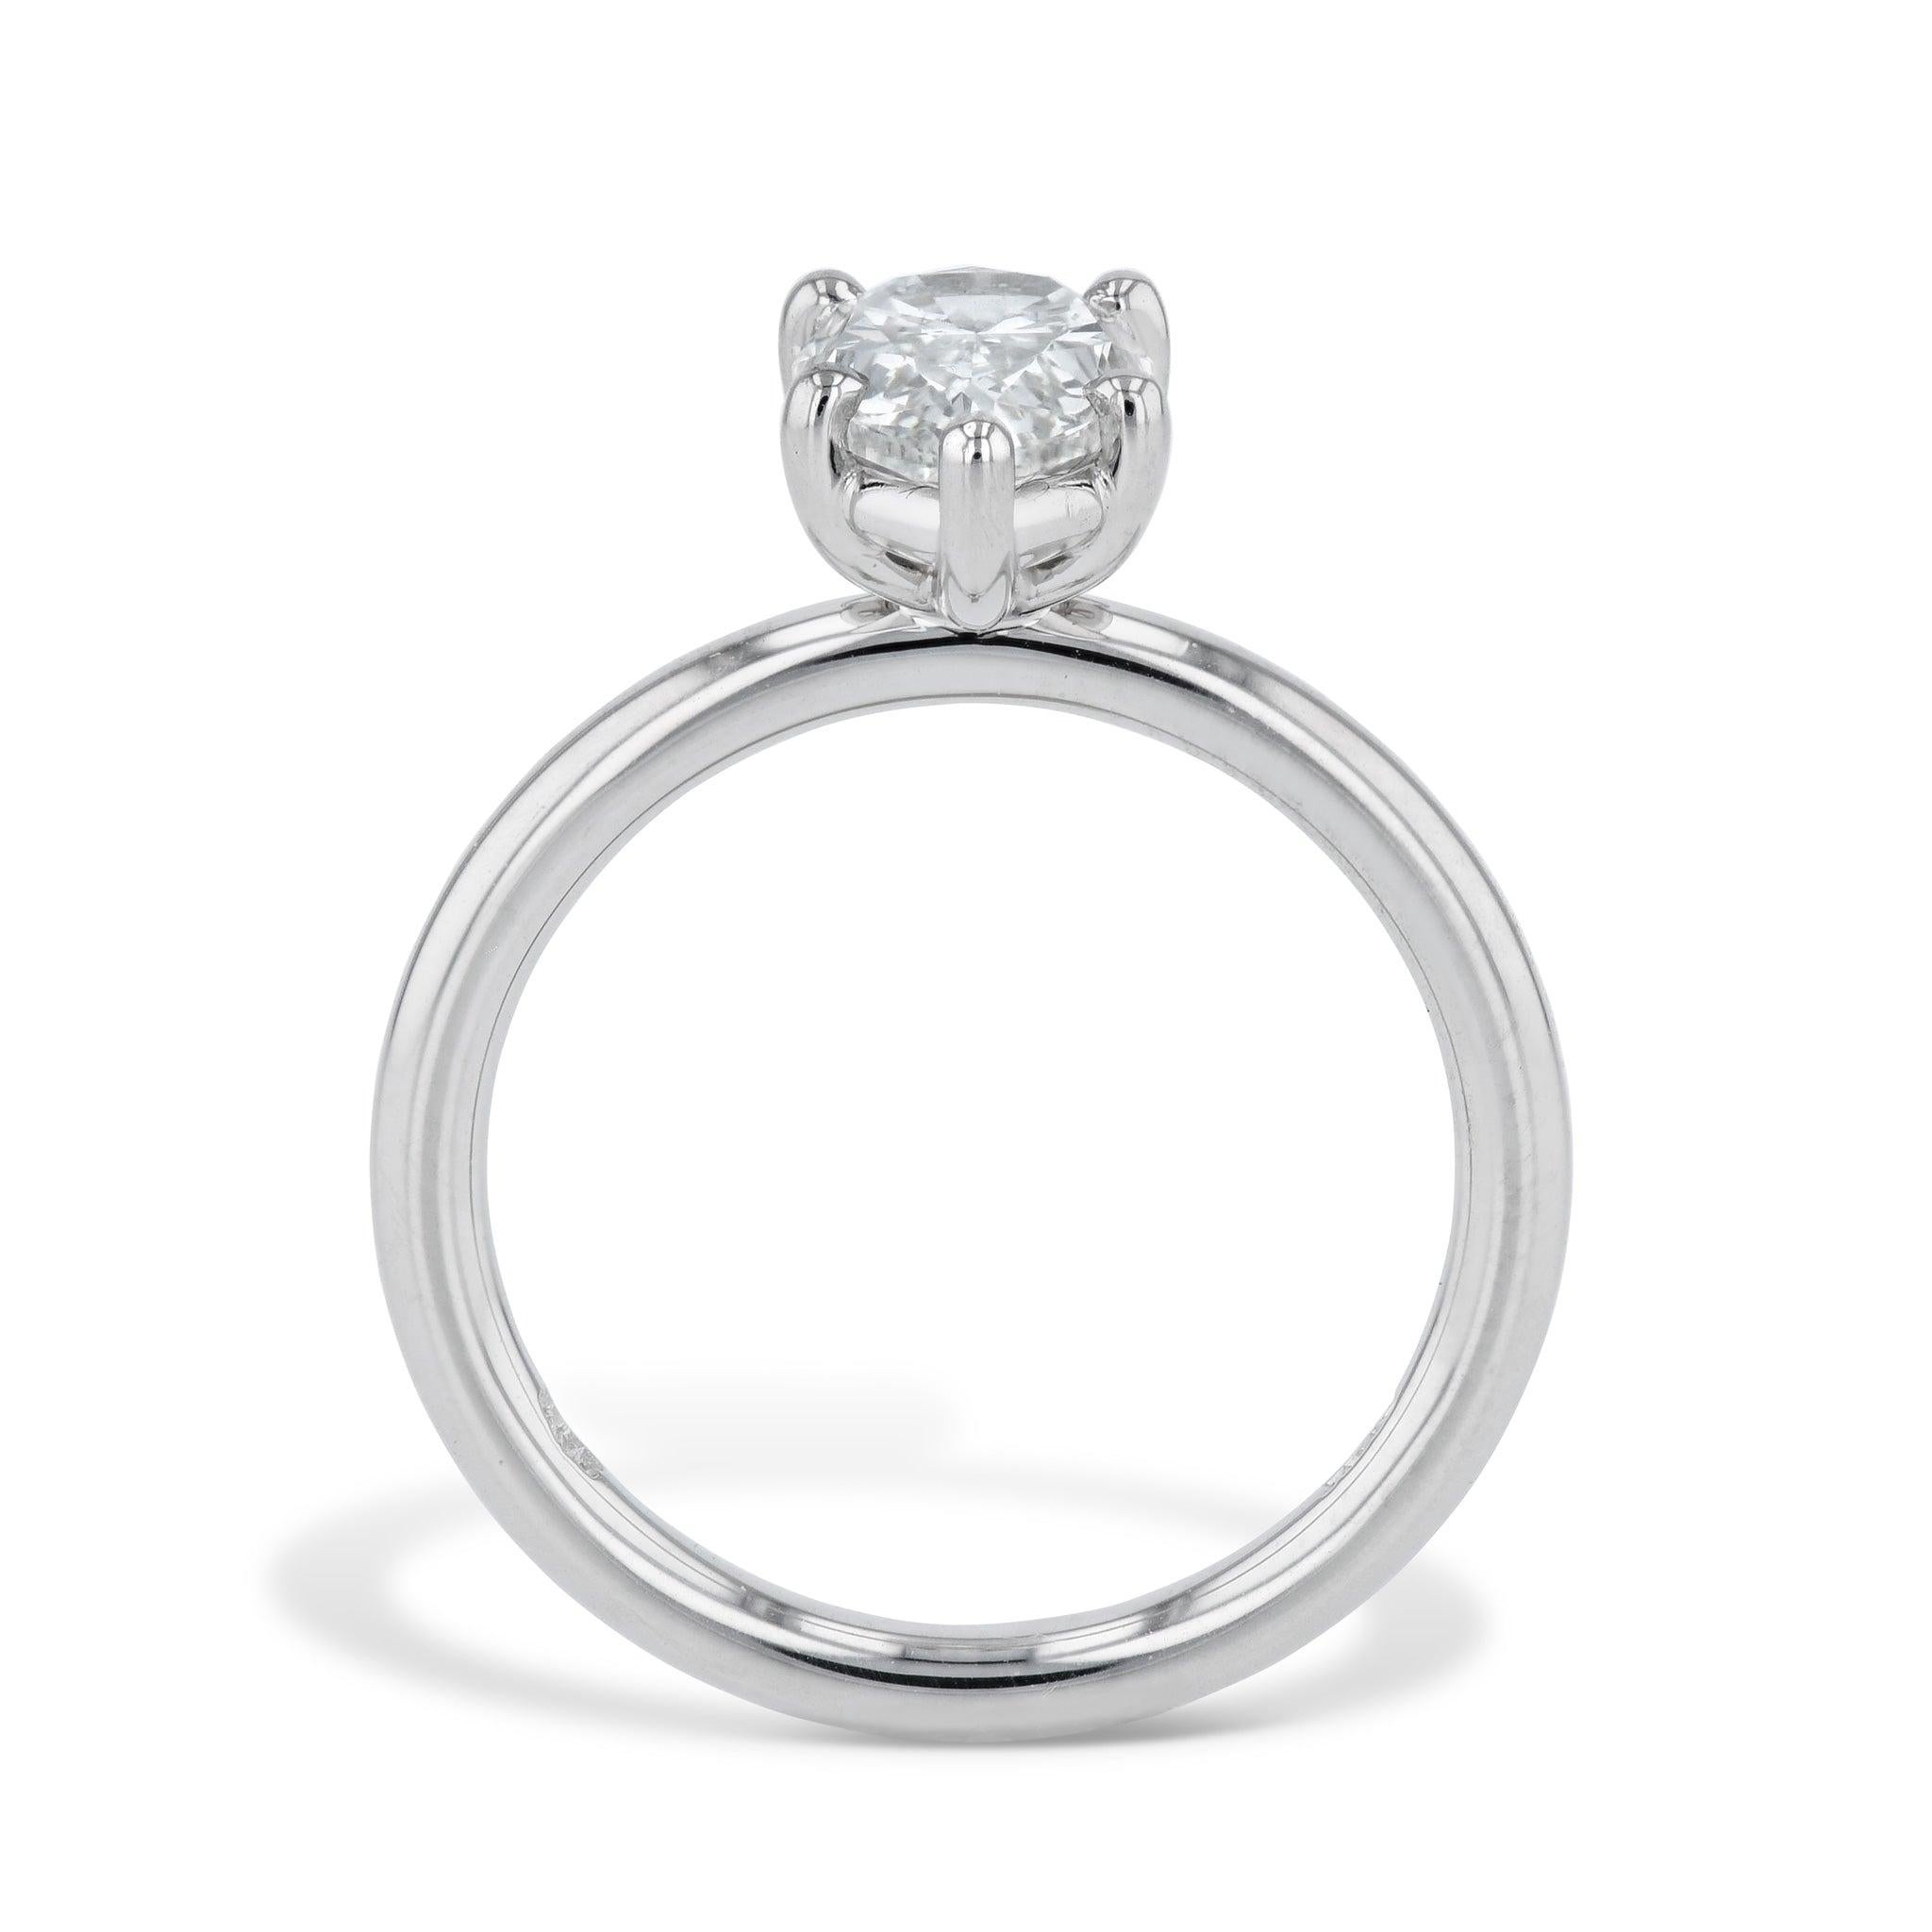 Delight in the exquisite beauty of this Pear Shape Diamond Platinum Engagement Ring. A stunning Pear Shape Diamond is magnificently prong set in Platinum and is sure to enchant! Handmade exclusively for the H&H Collection and sized to a 6, this